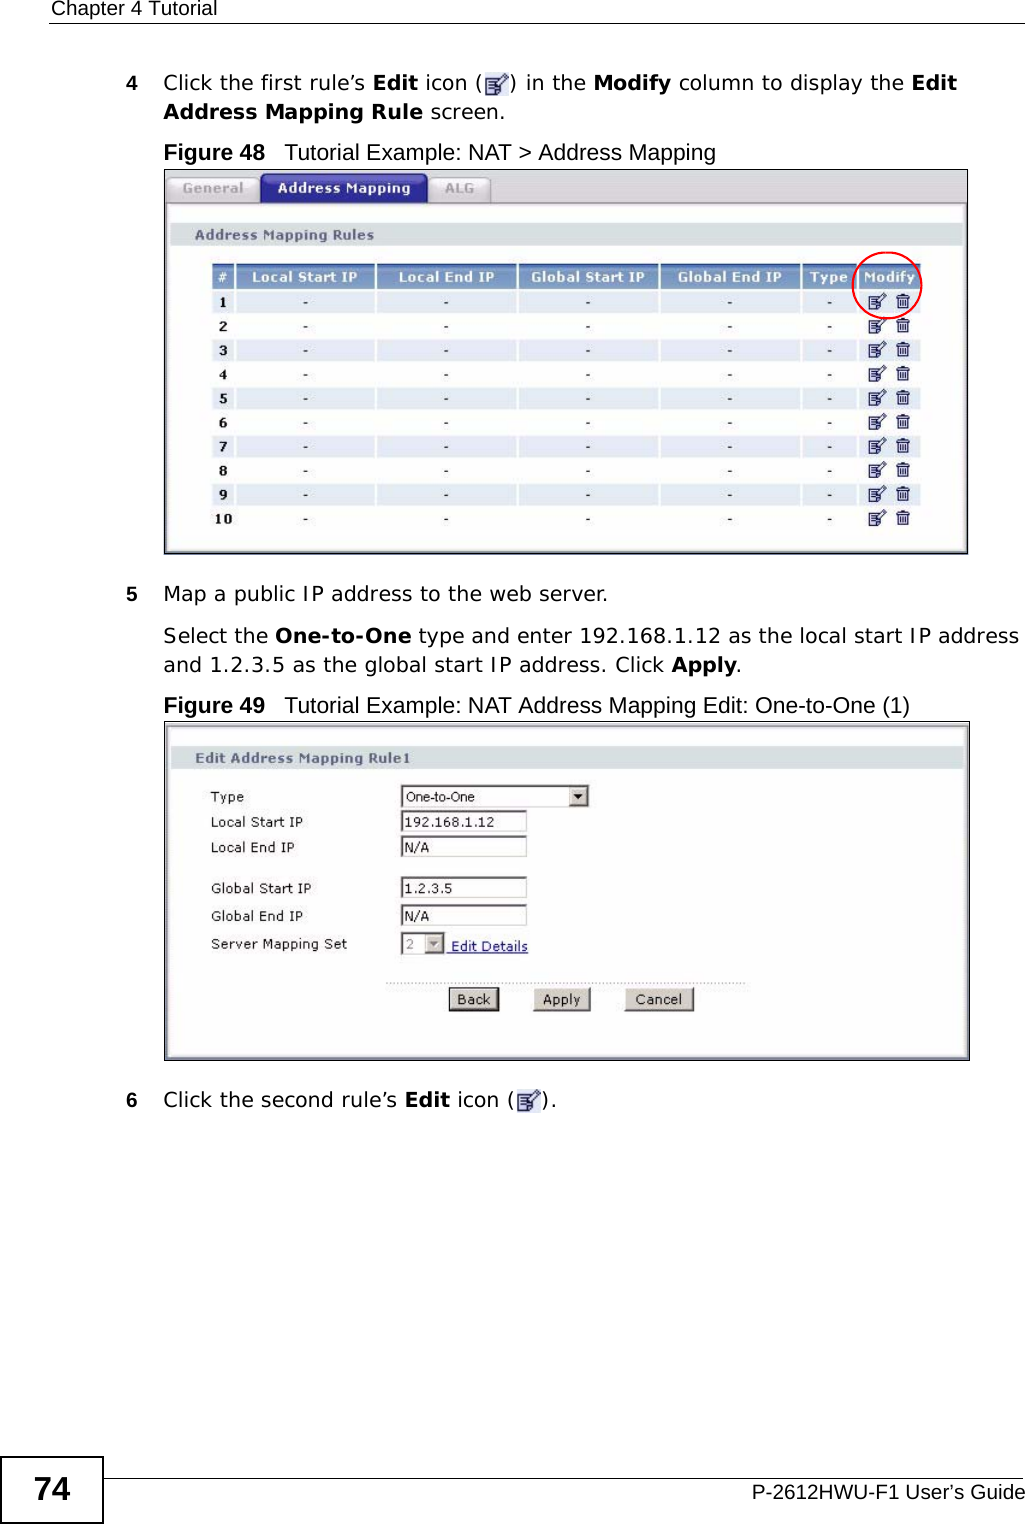 Chapter 4 TutorialP-2612HWU-F1 User’s Guide744Click the first rule’s Edit icon ( ) in the Modify column to display the Edit Address Mapping Rule screen.Figure 48   Tutorial Example: NAT &gt; Address Mapping5Map a public IP address to the web server.Select the One-to-One type and enter 192.168.1.12 as the local start IP address and 1.2.3.5 as the global start IP address. Click Apply.Figure 49   Tutorial Example: NAT Address Mapping Edit: One-to-One (1) 6Click the second rule’s Edit icon ( ).